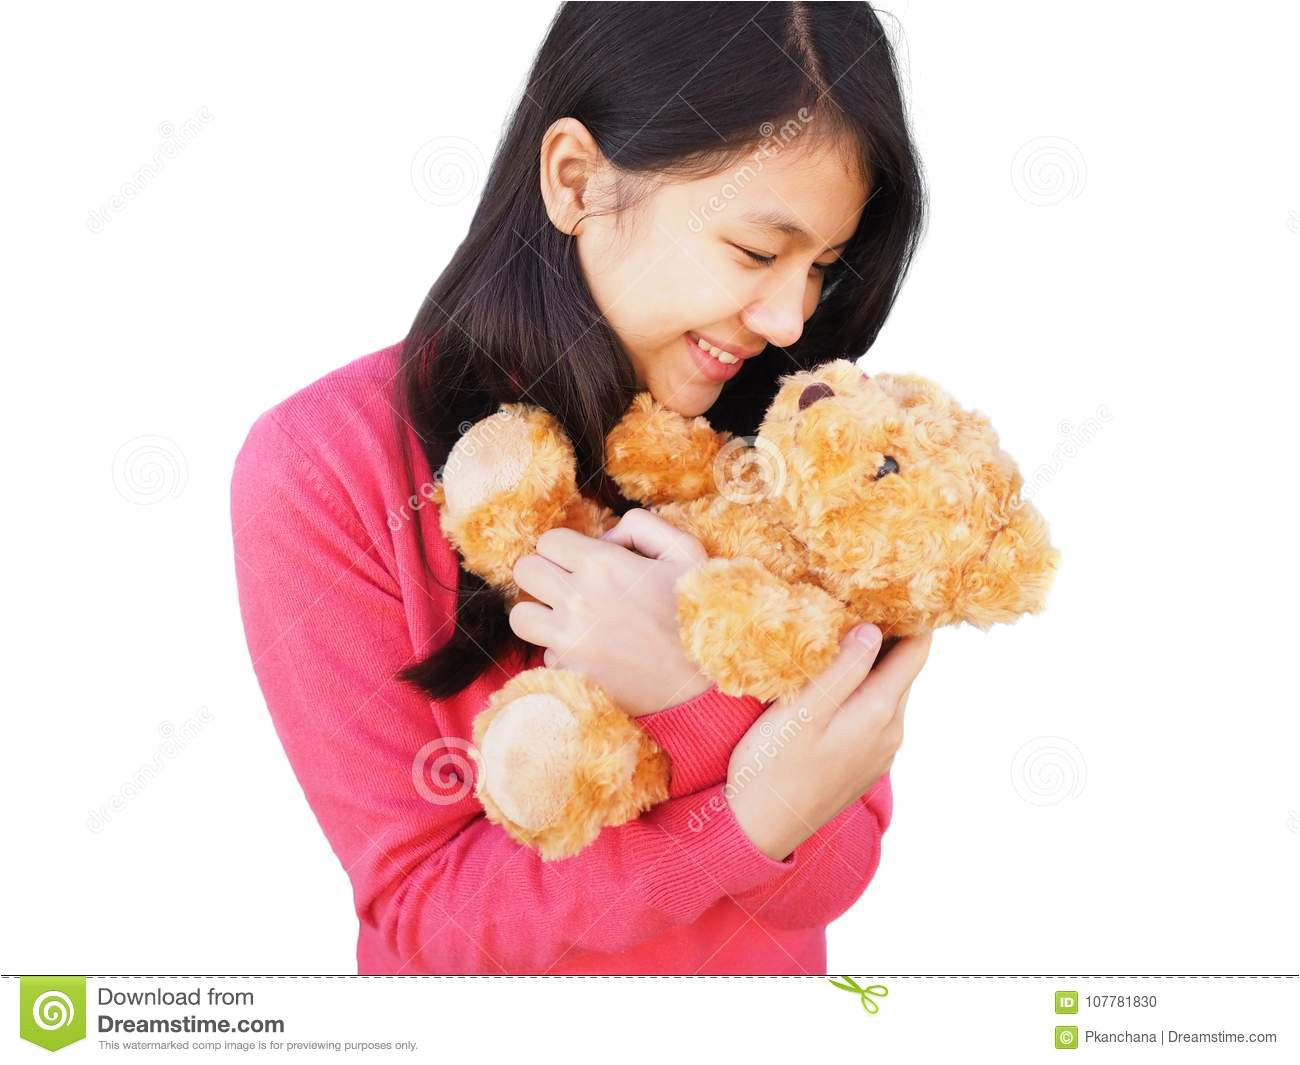 Asian girl with long hair smiling to brown teddy bear in her arm